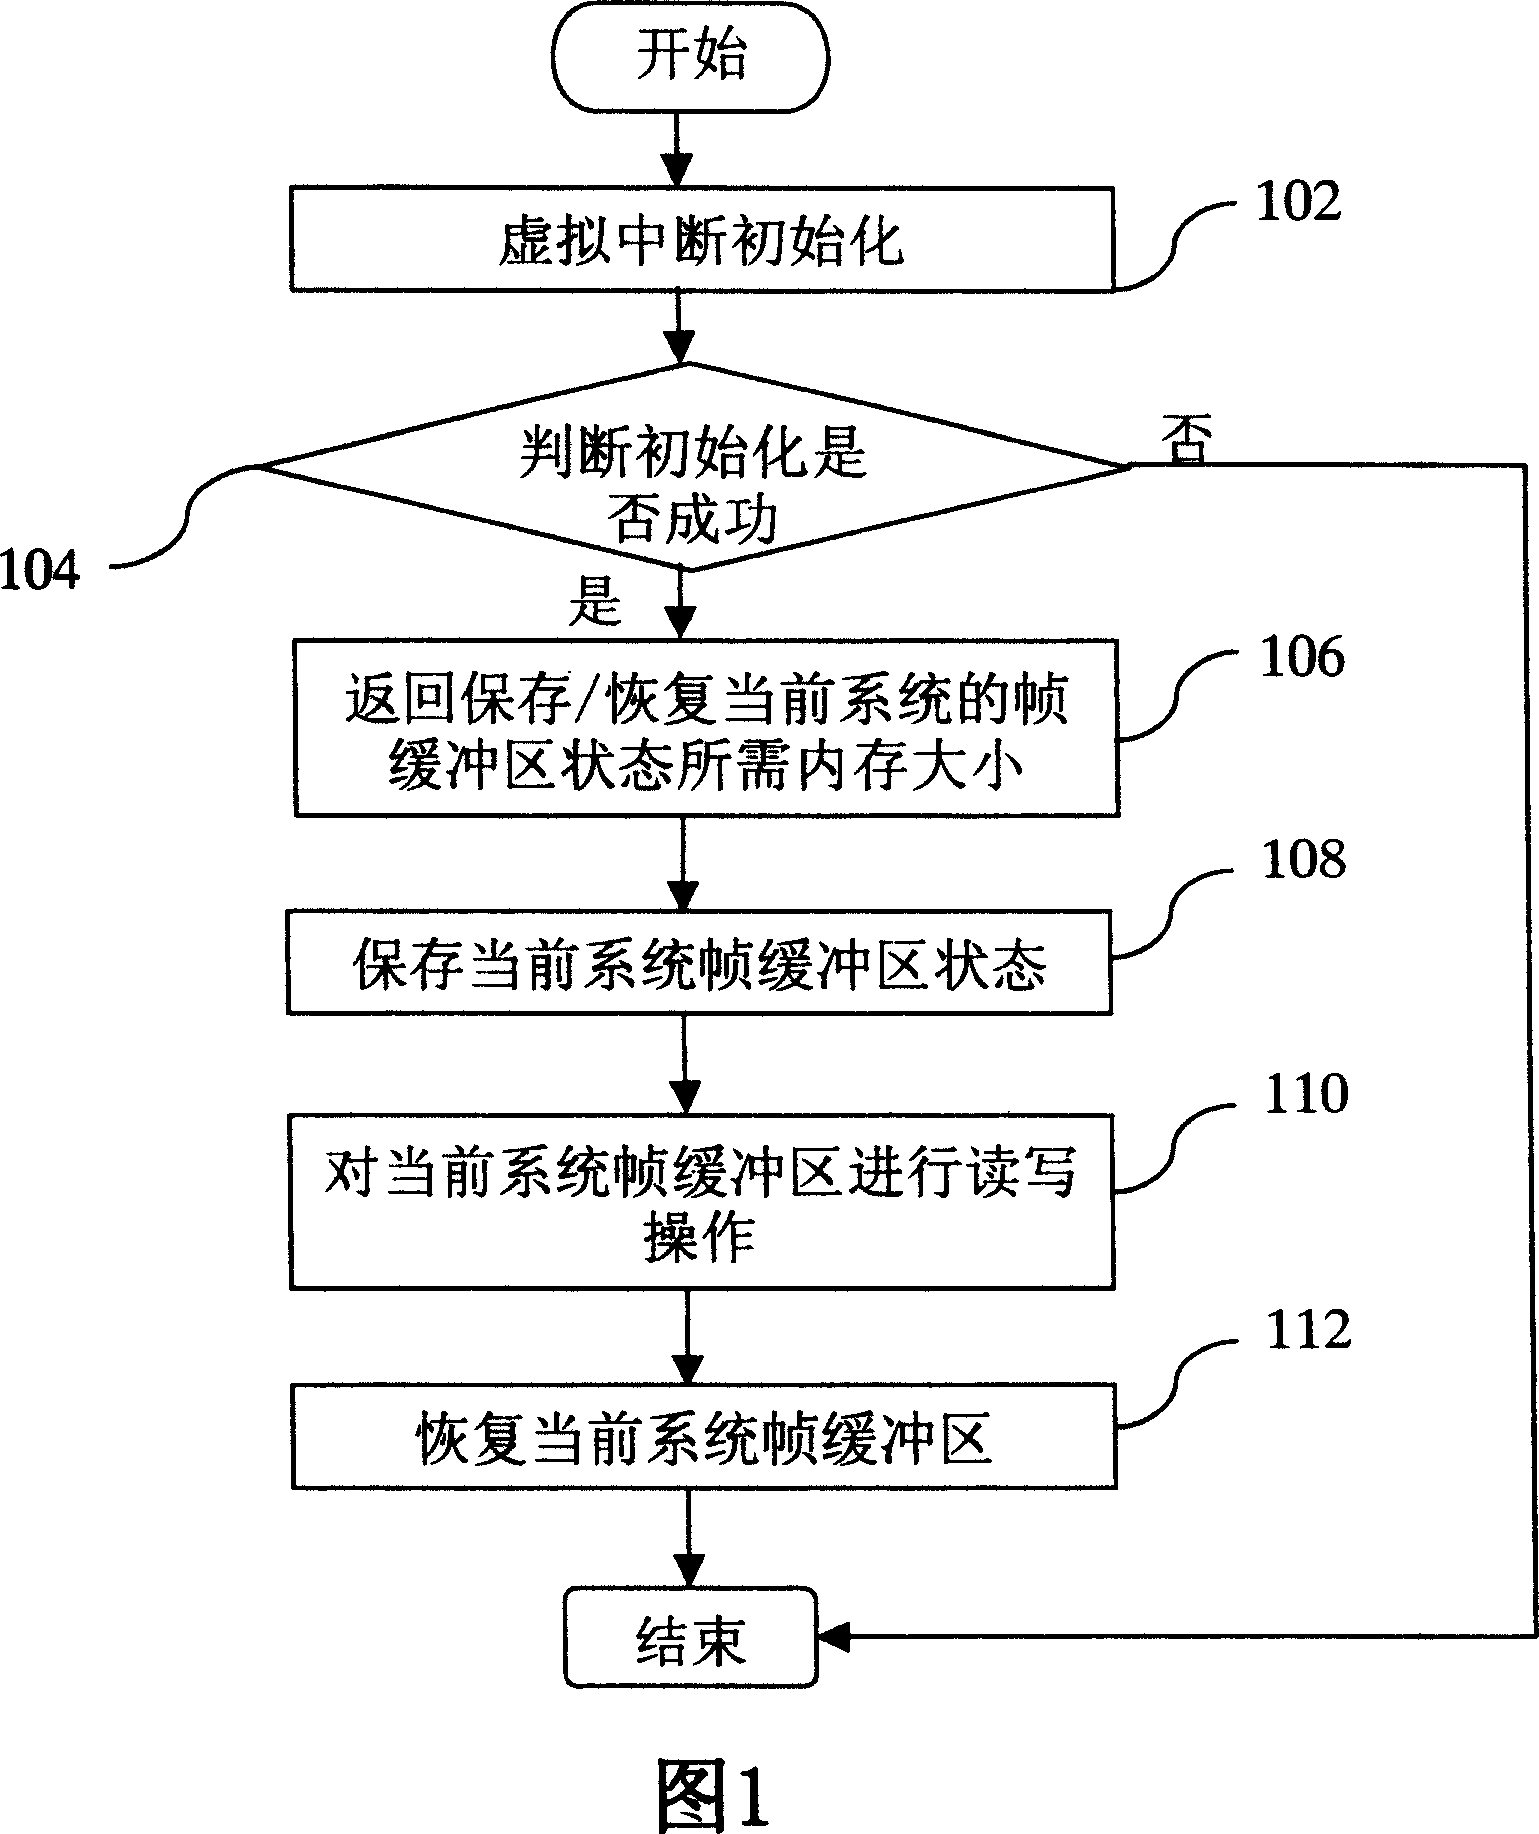 Protecting method for frame buffer zone state